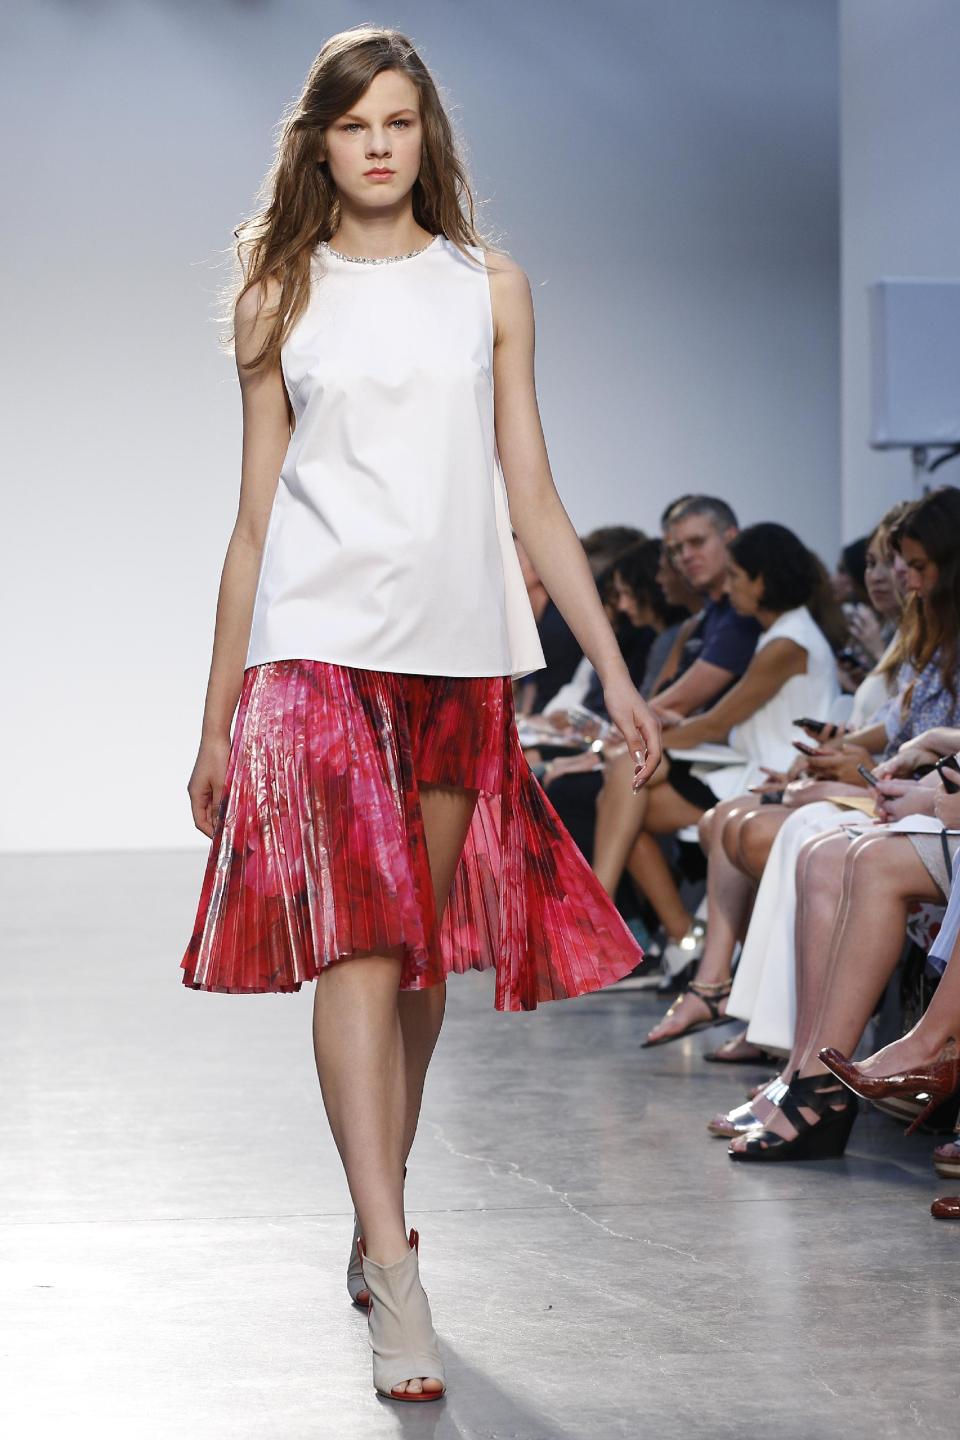 The Thakoon Spring 2014 collection is modeled during Fashion Week in New York, Sunday, Sept. 8, 2013. (AP Photo/John Minchillo)